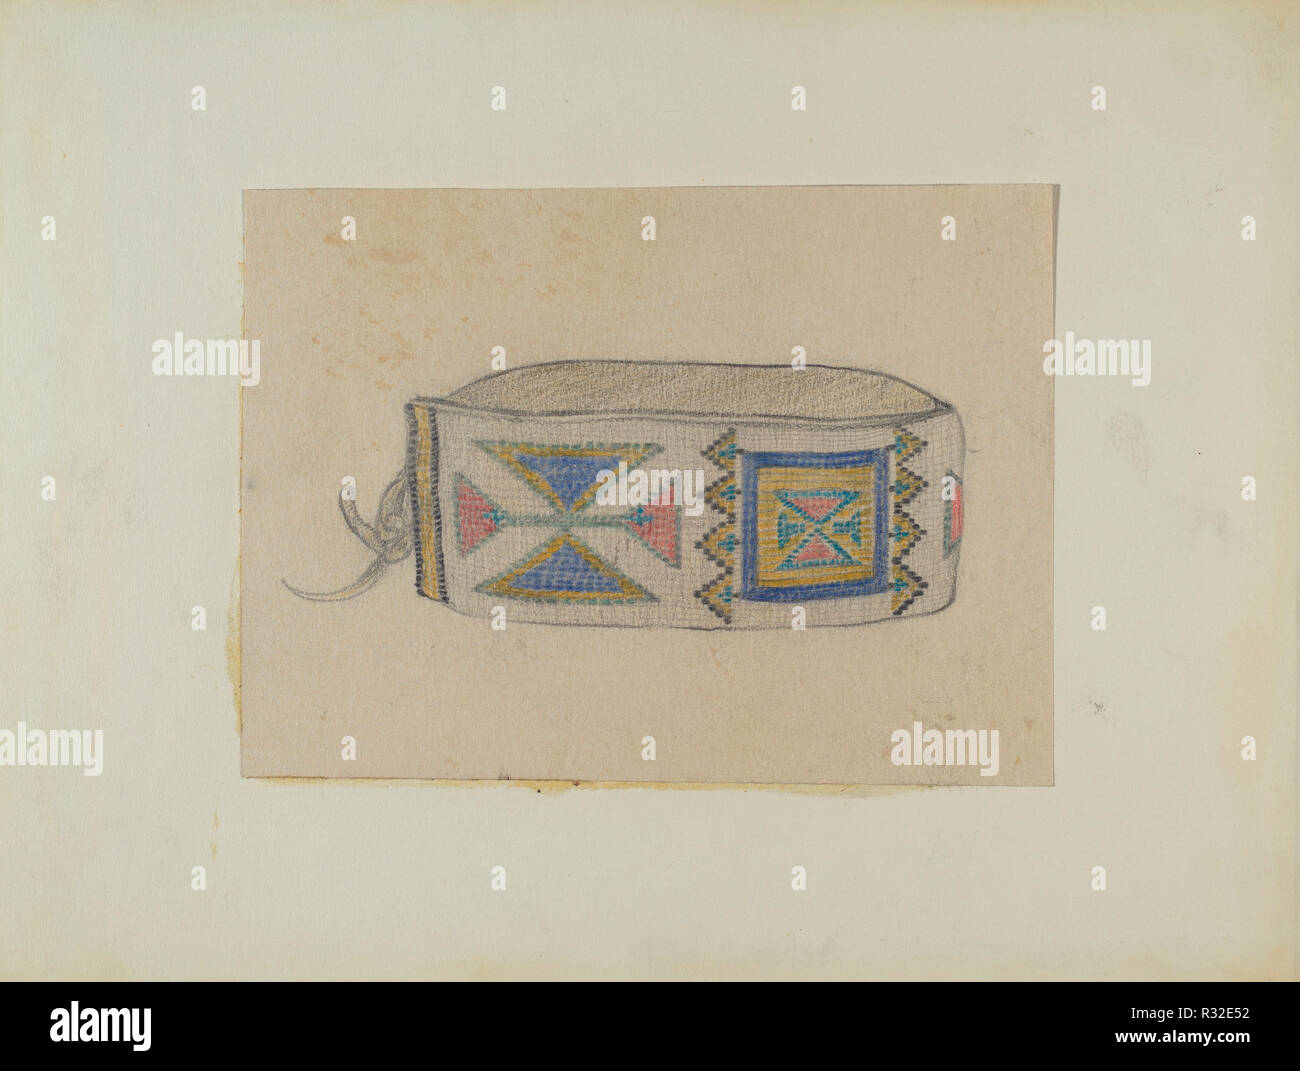 Armband. Dated: 1935/1942. Dimensions: overall: 18.1 x 13.1 cm (7 1/8 x 5 3/16 in.). Medium: colored pencil and graphite on paper. Museum: National Gallery of Art, Washington DC. Author: George B. Wally. Stock Photo